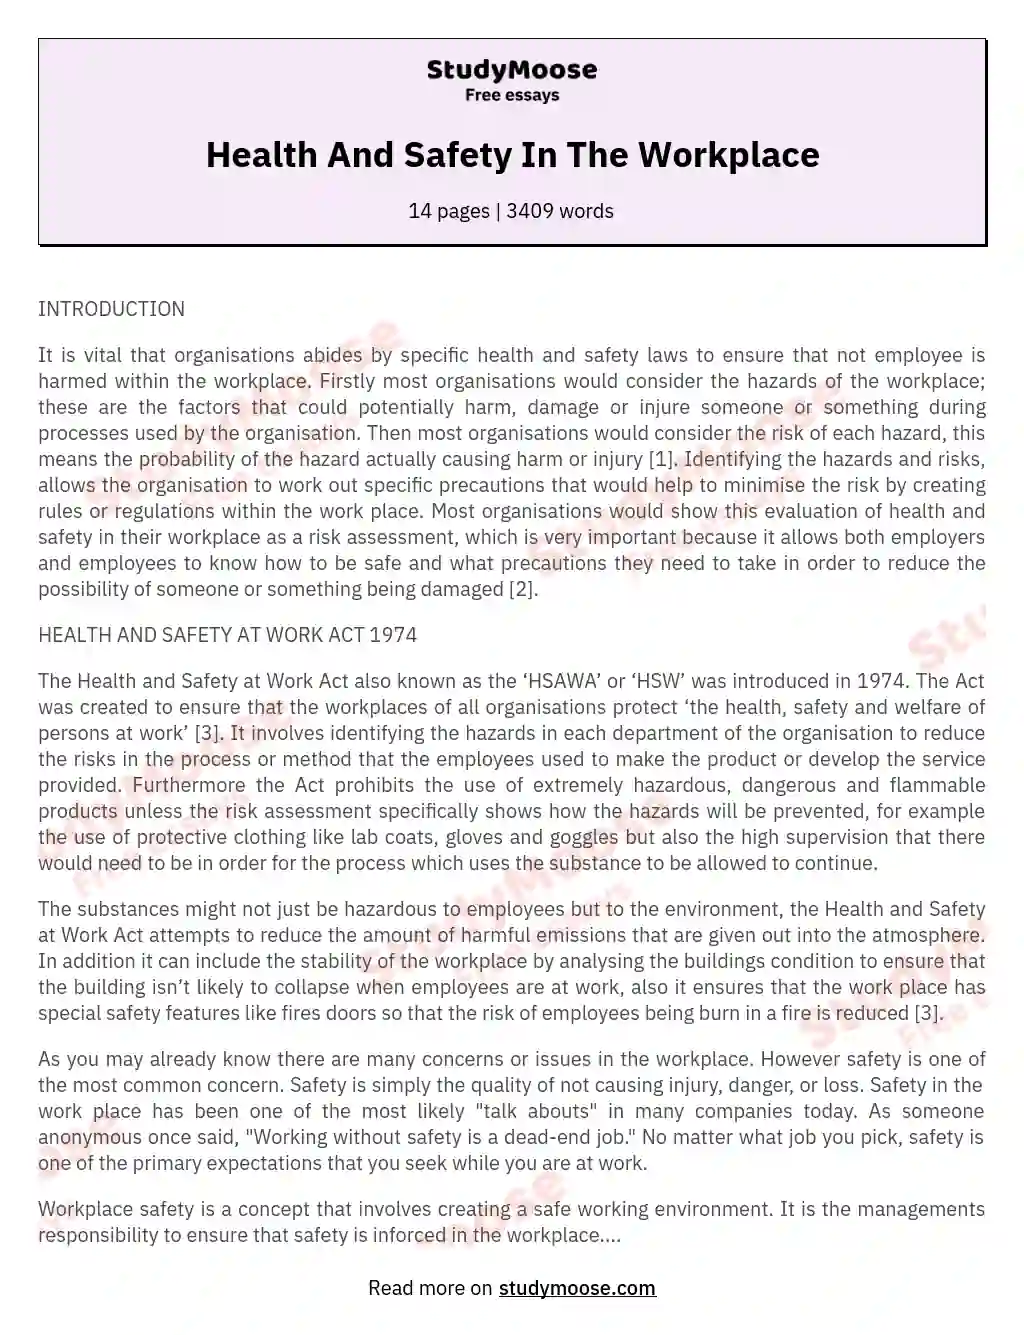 Health And Safety In The Workplace essay